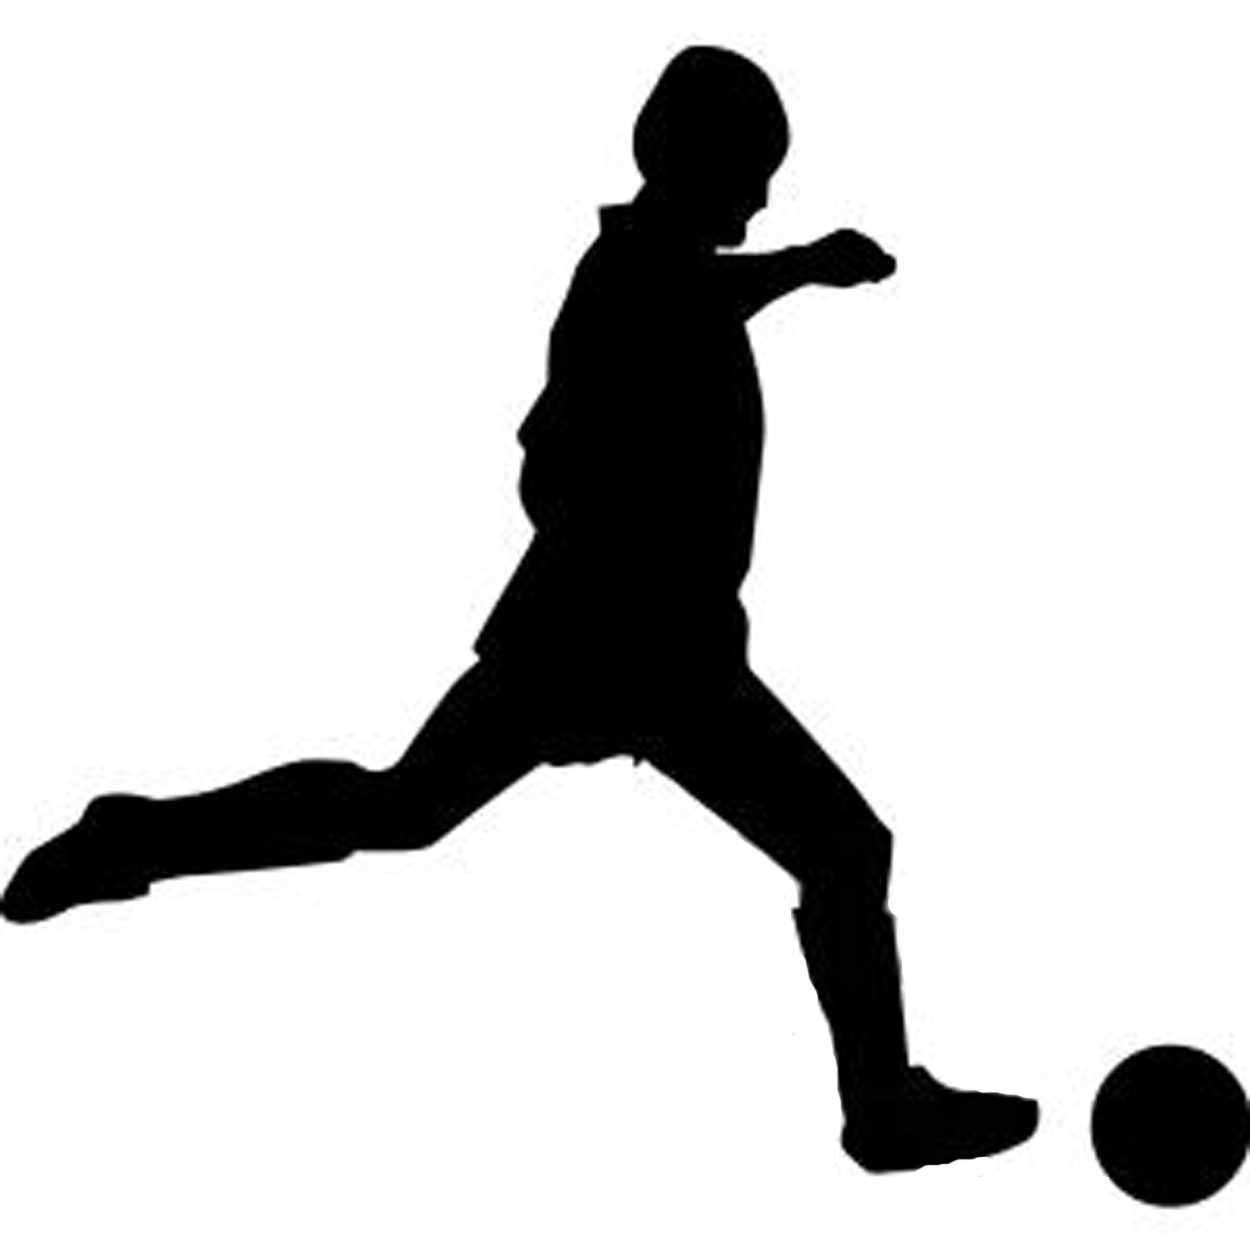 Soccer Player Silhouette | Clipart Panda - Free Clipart Images